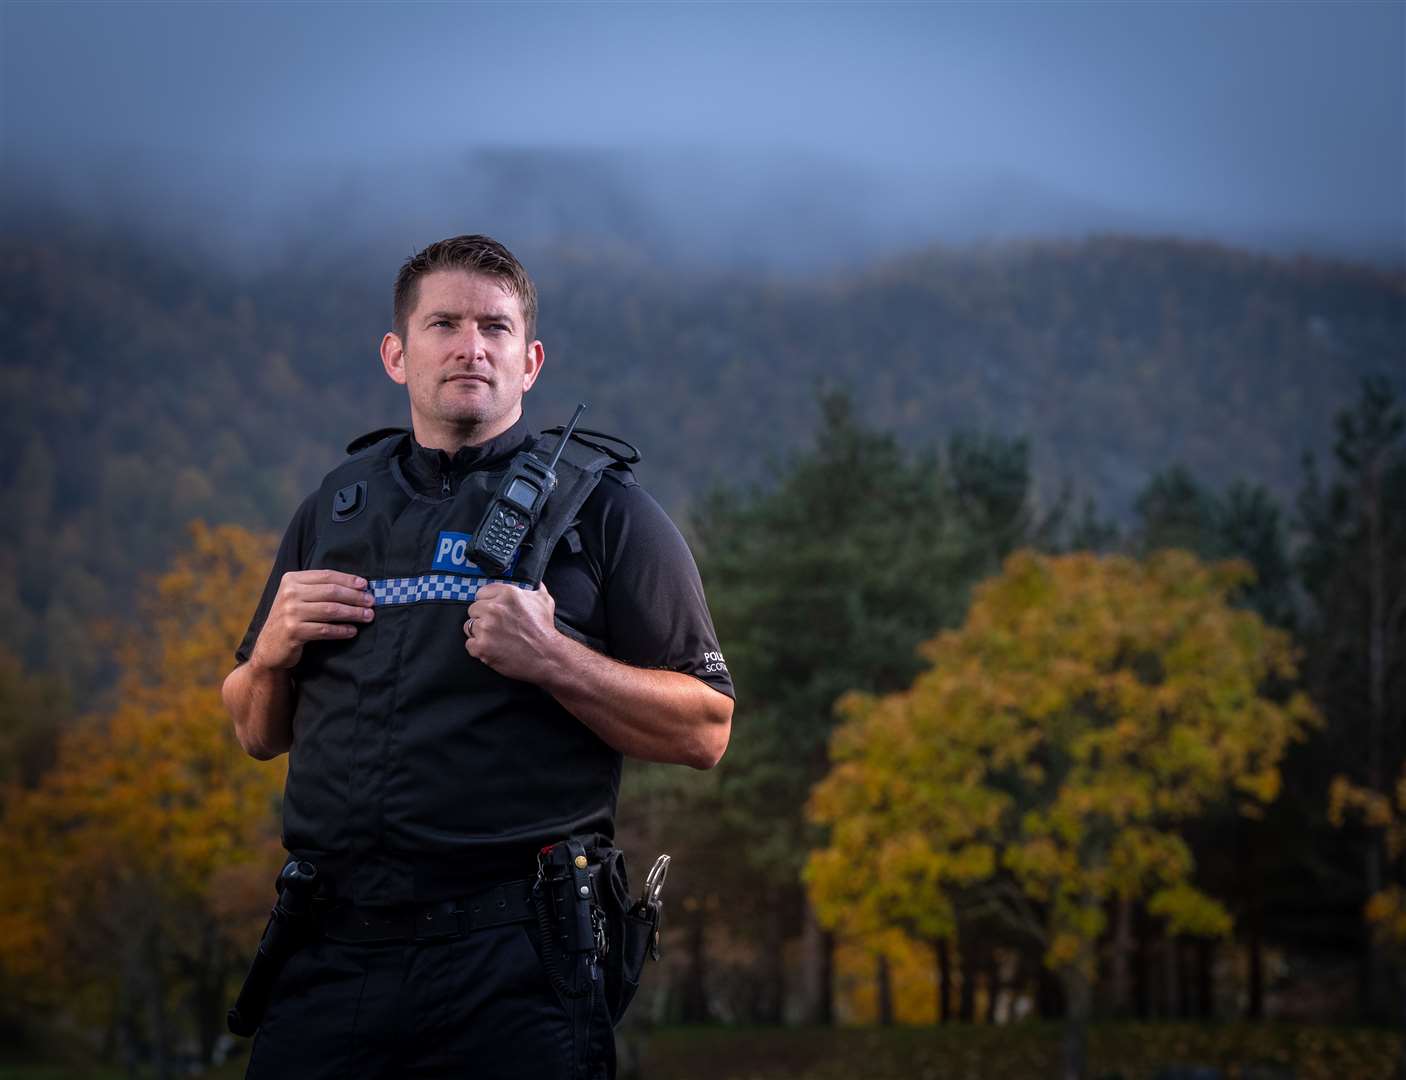 PAUL PHILLIPS: 'He didn’t hesitate to still protect the public'. Picture: Sandy Young/scottishphotographer.com